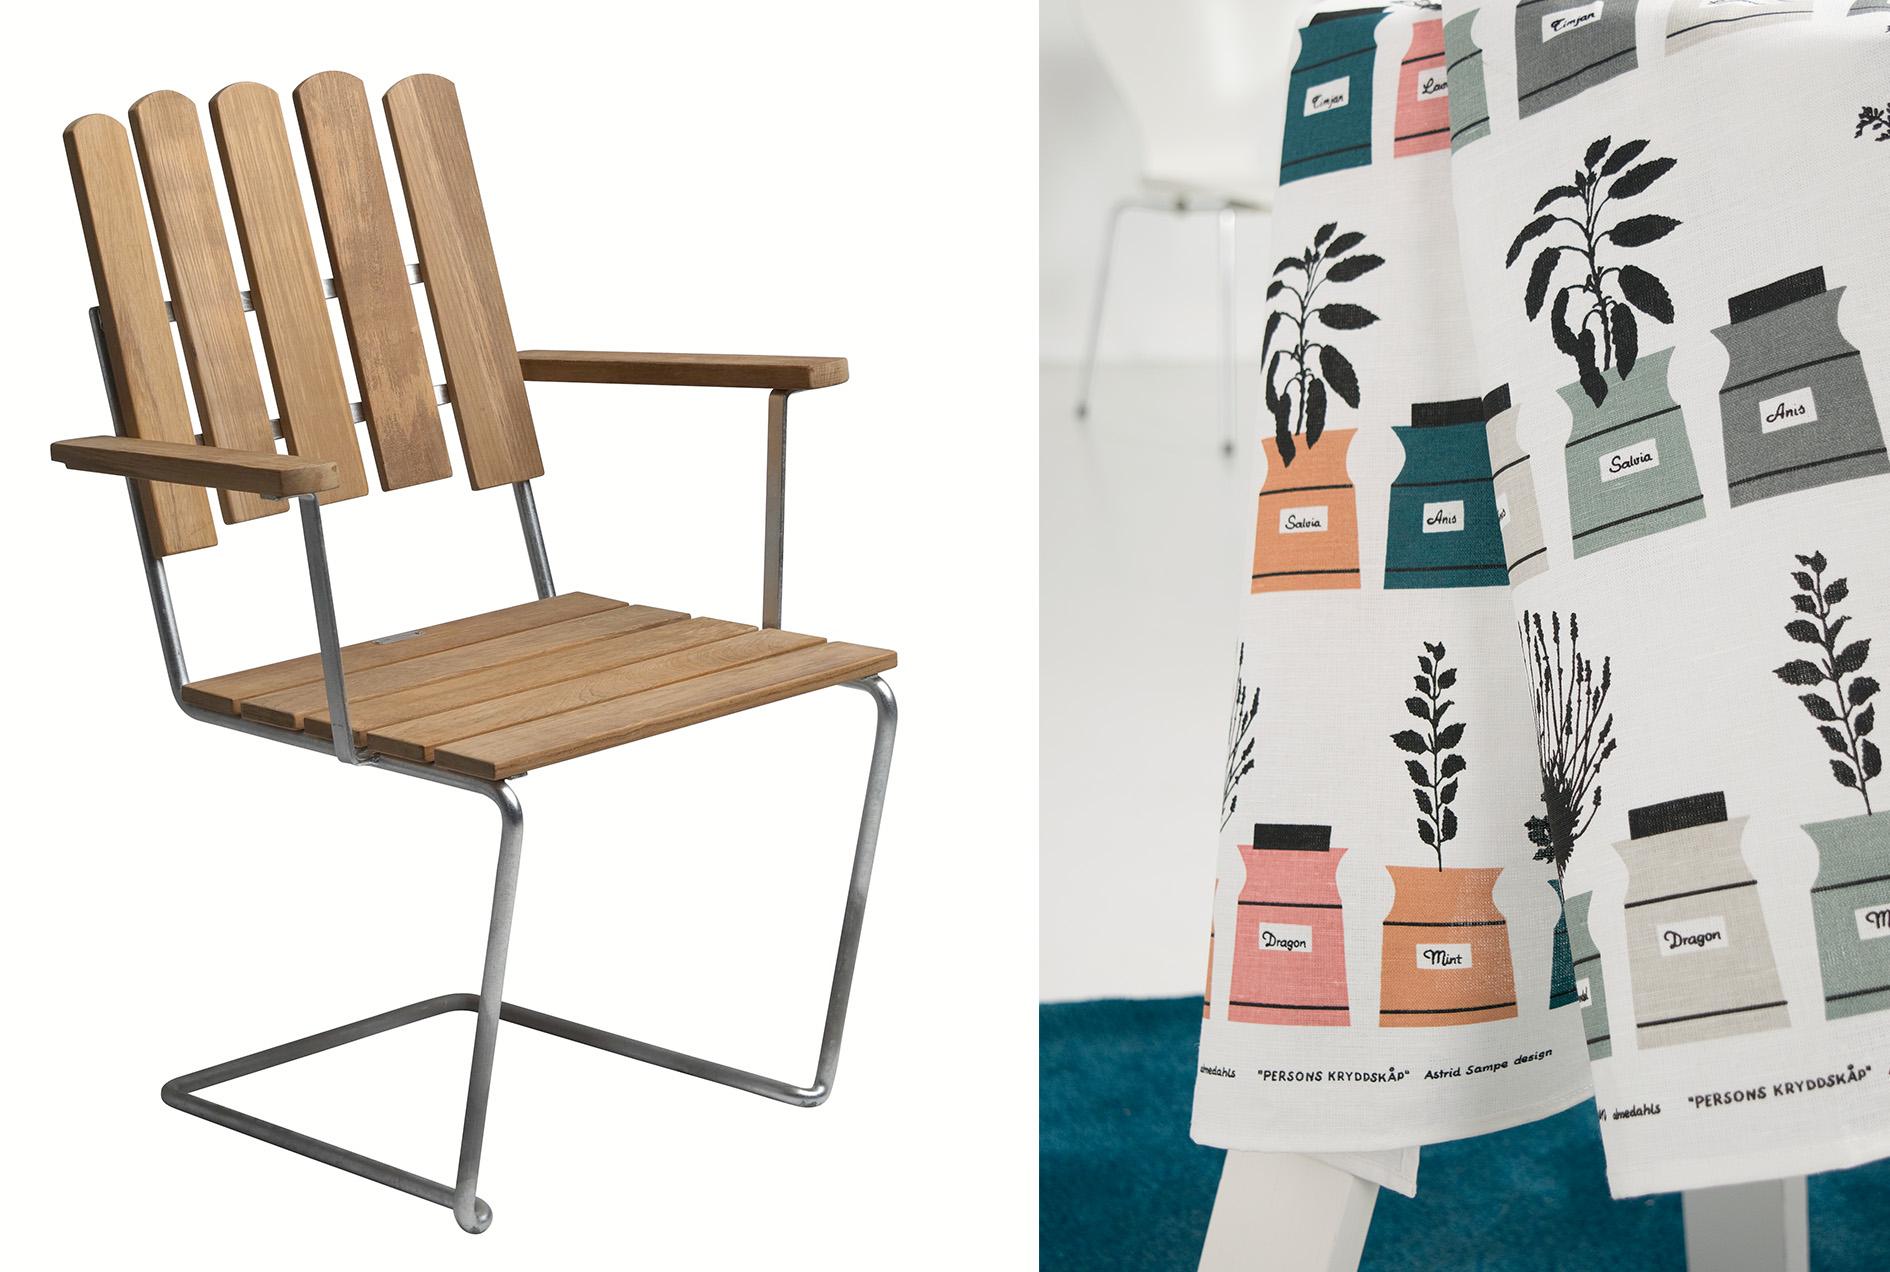 Left: A wooden garden chair. Right: Fabric with a pattern.